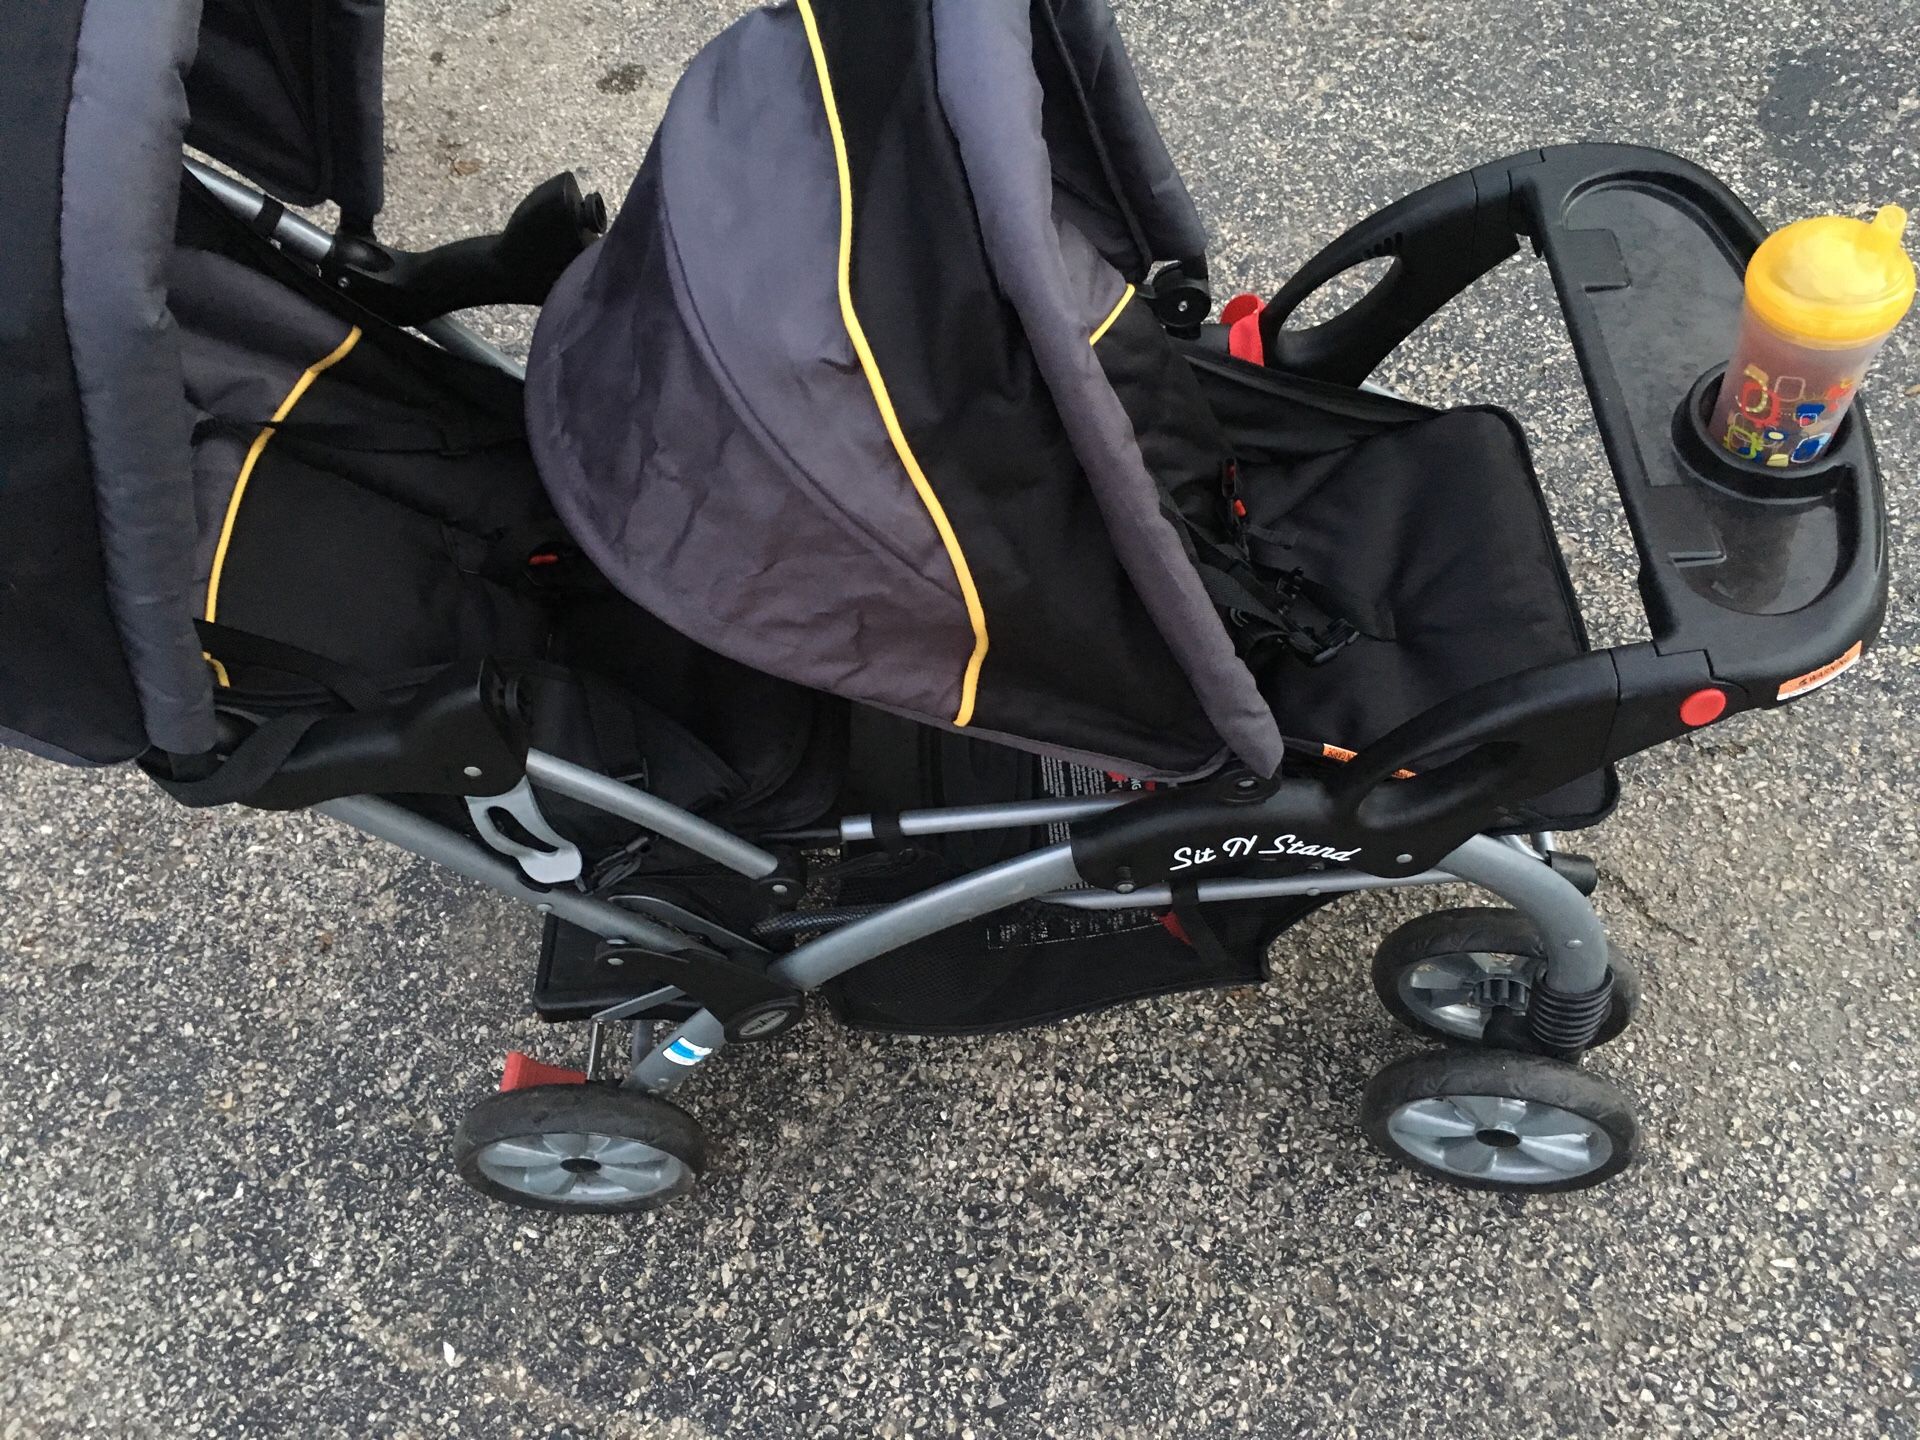 Baby trend sit n stand double stroller. Black/yellow/gray. Missing tray in second seat.